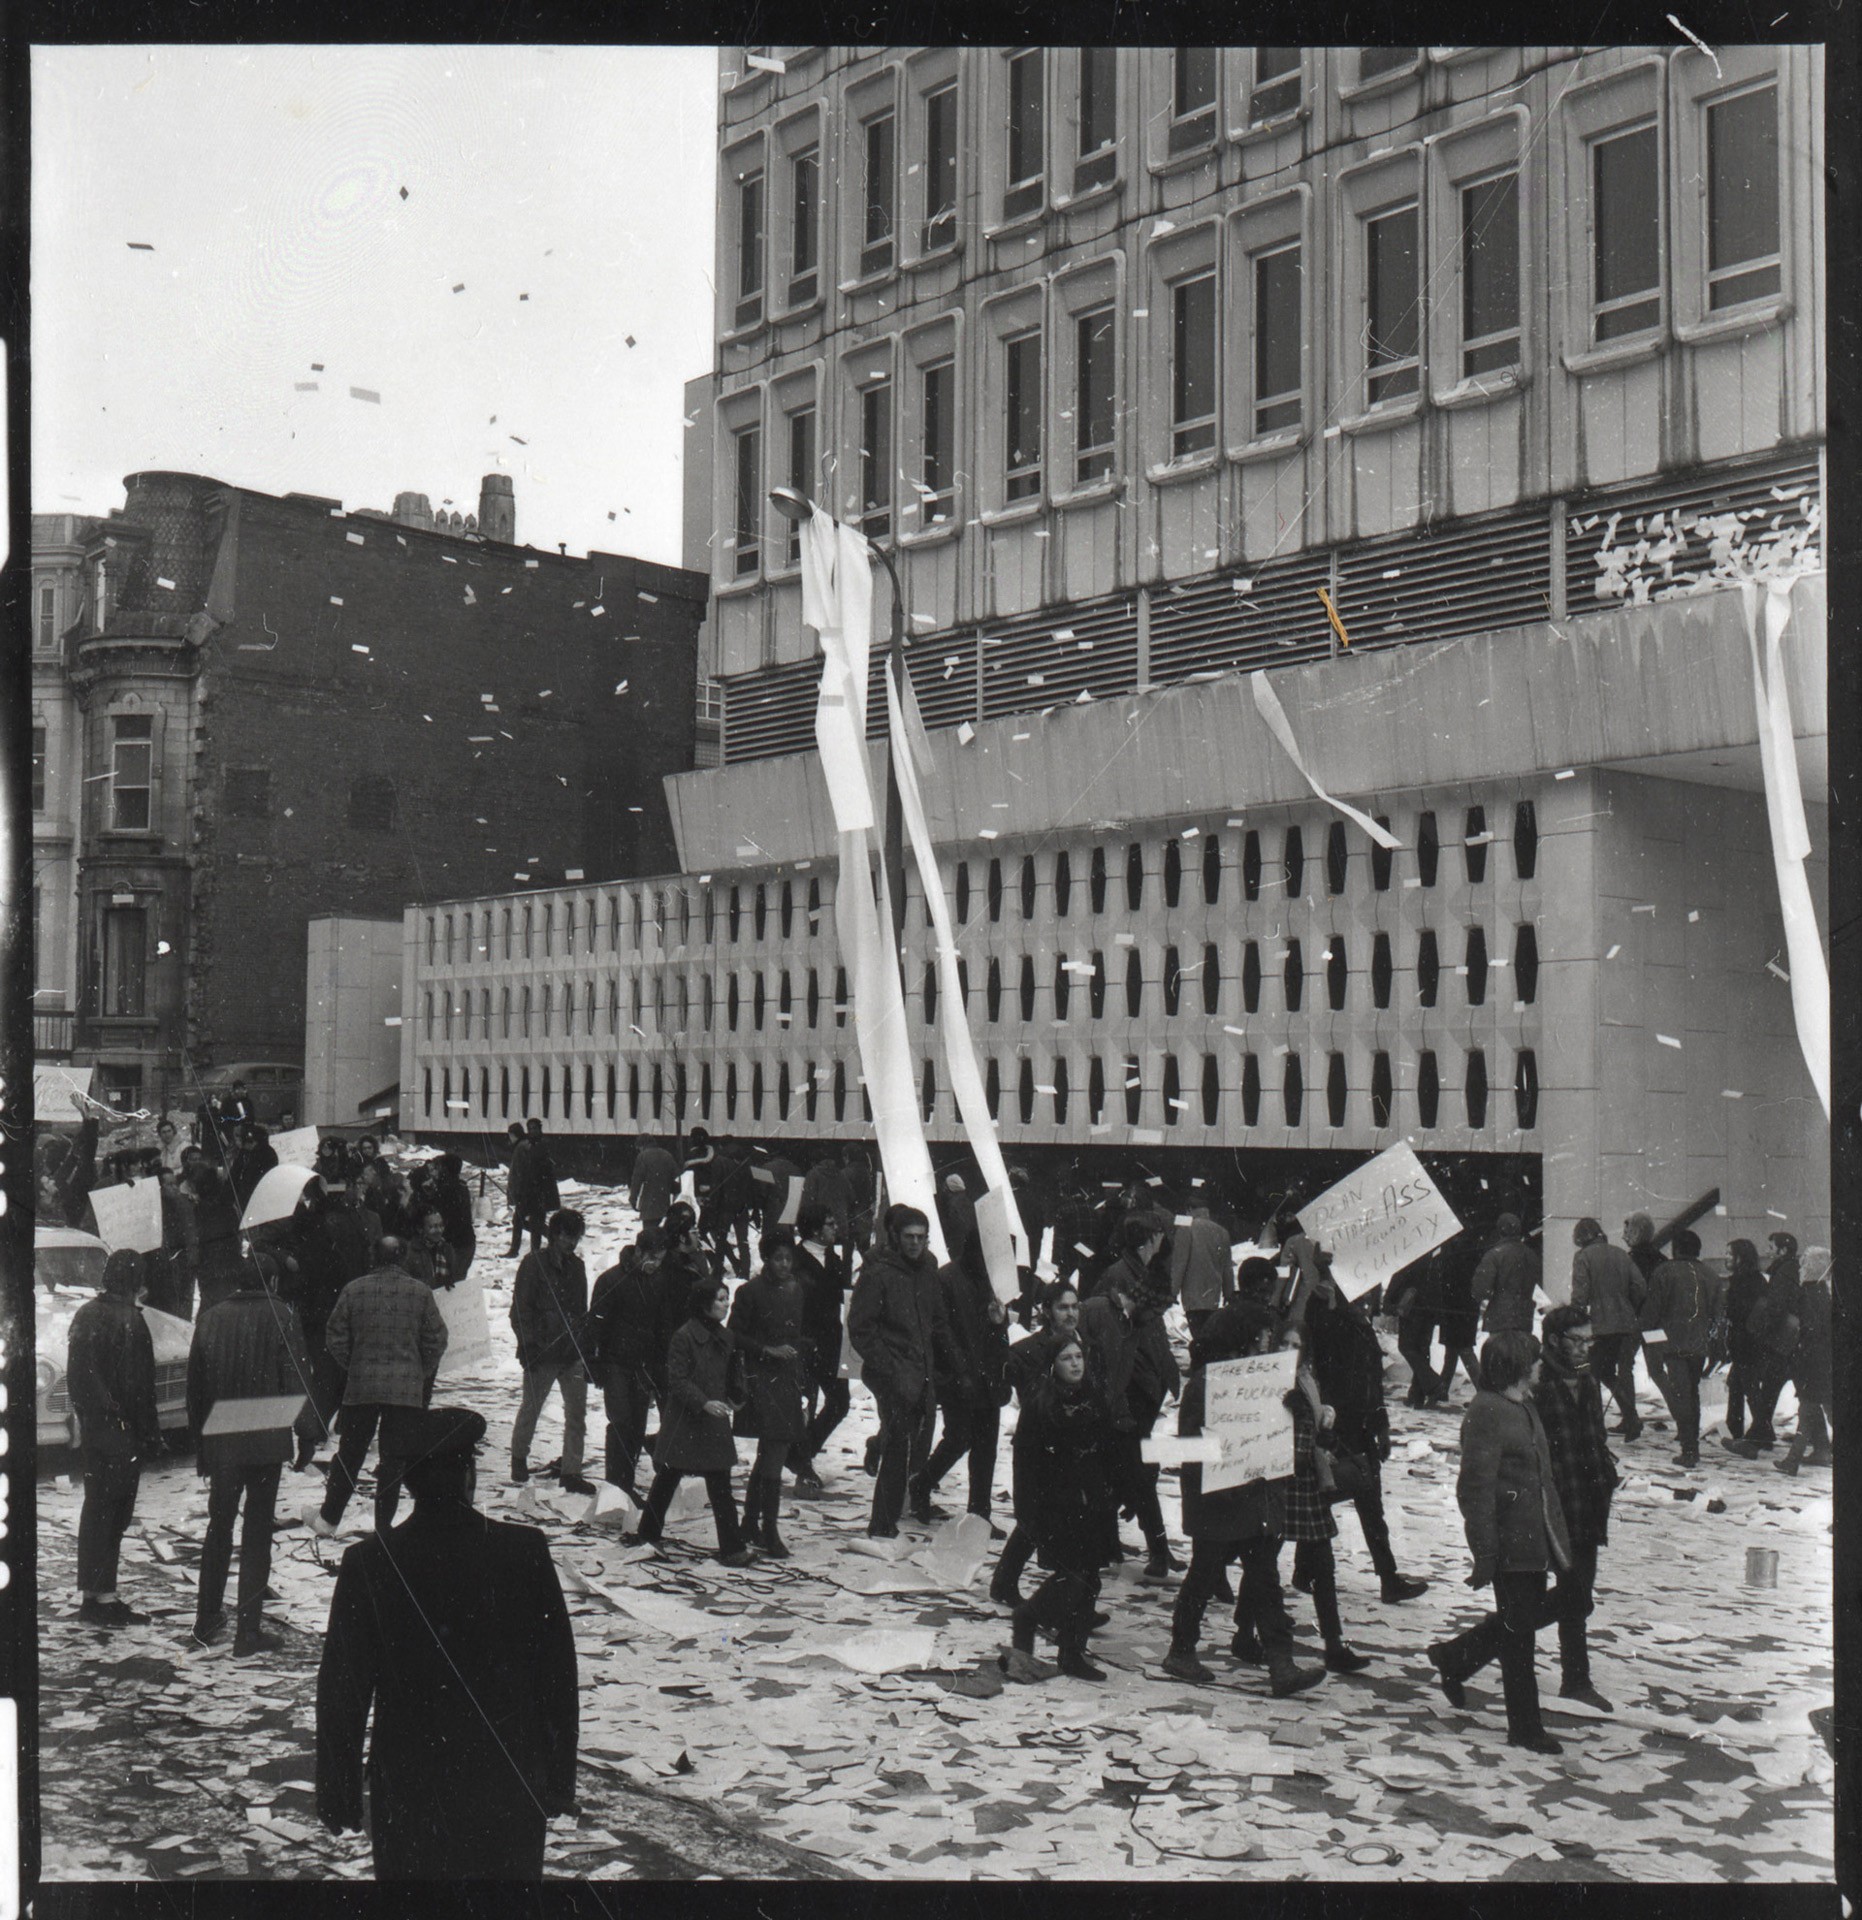 Protesters walk down Mackay Street, which is littered with computer paper and data cards.